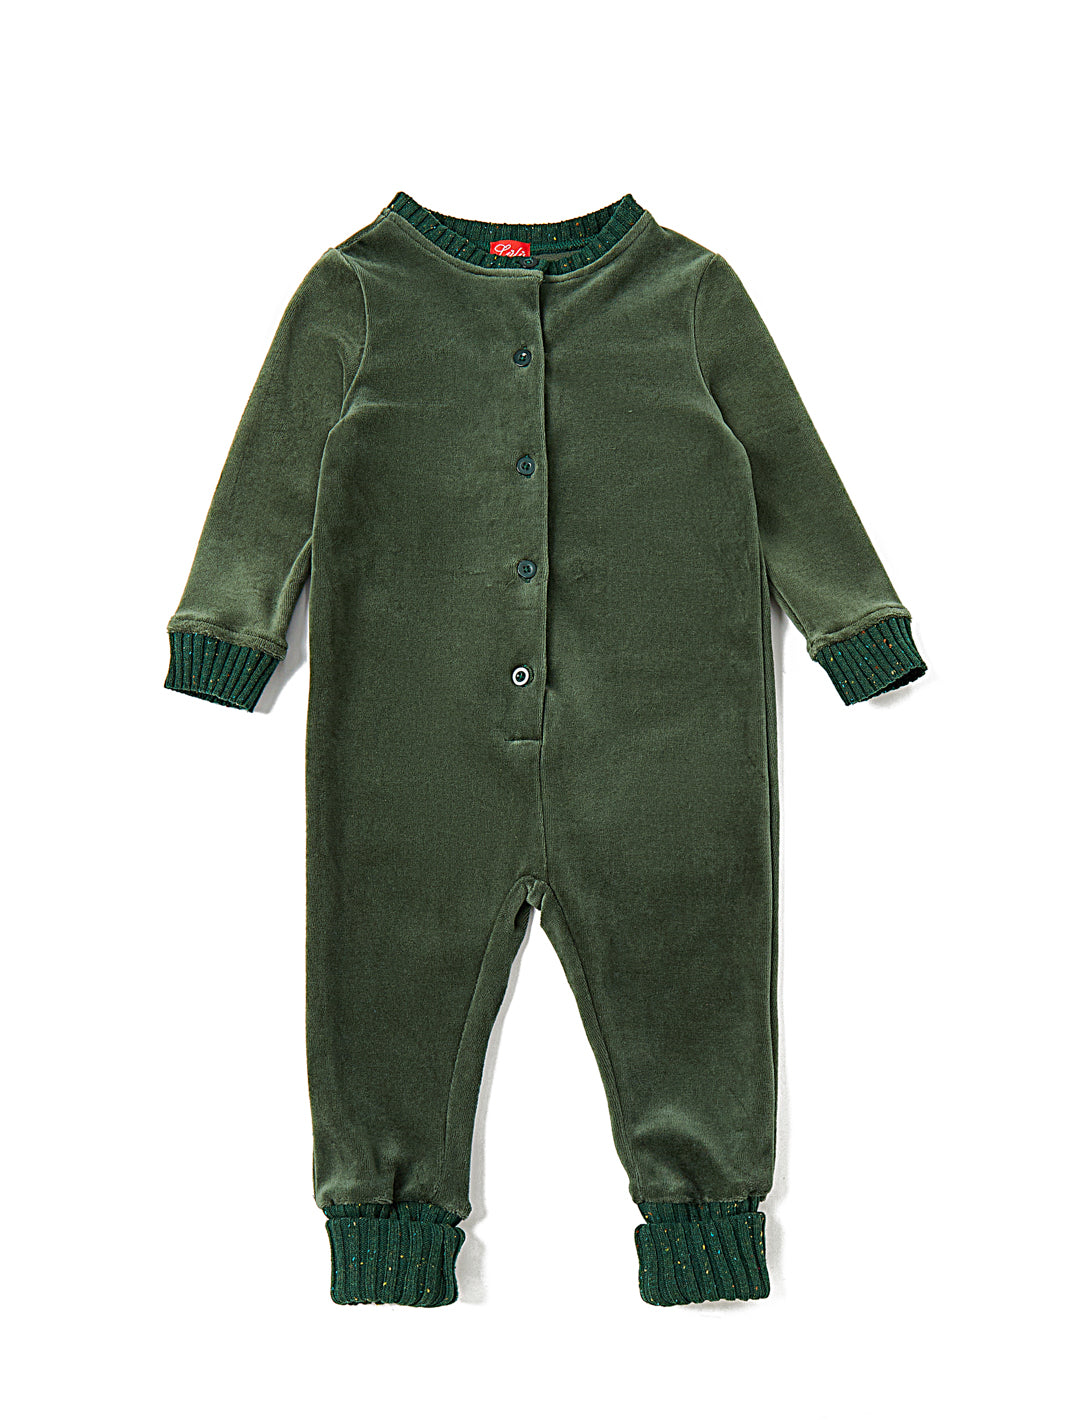 Baby Velour Overall - Green